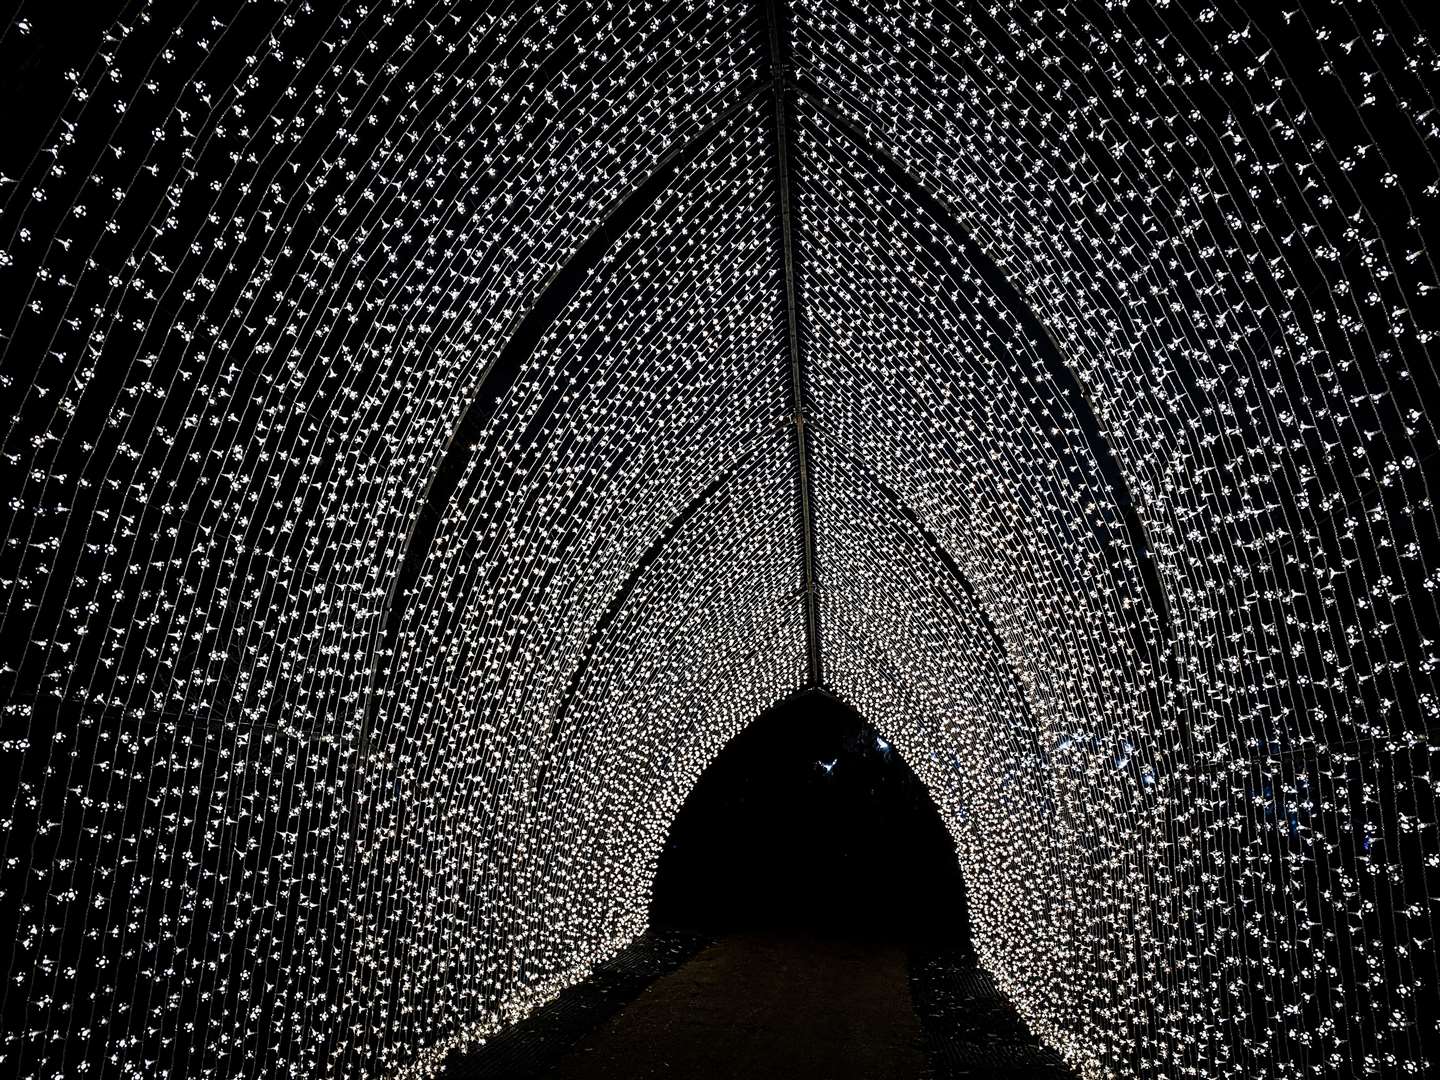 Lots of people were taking photos in the dazzling light tunnel